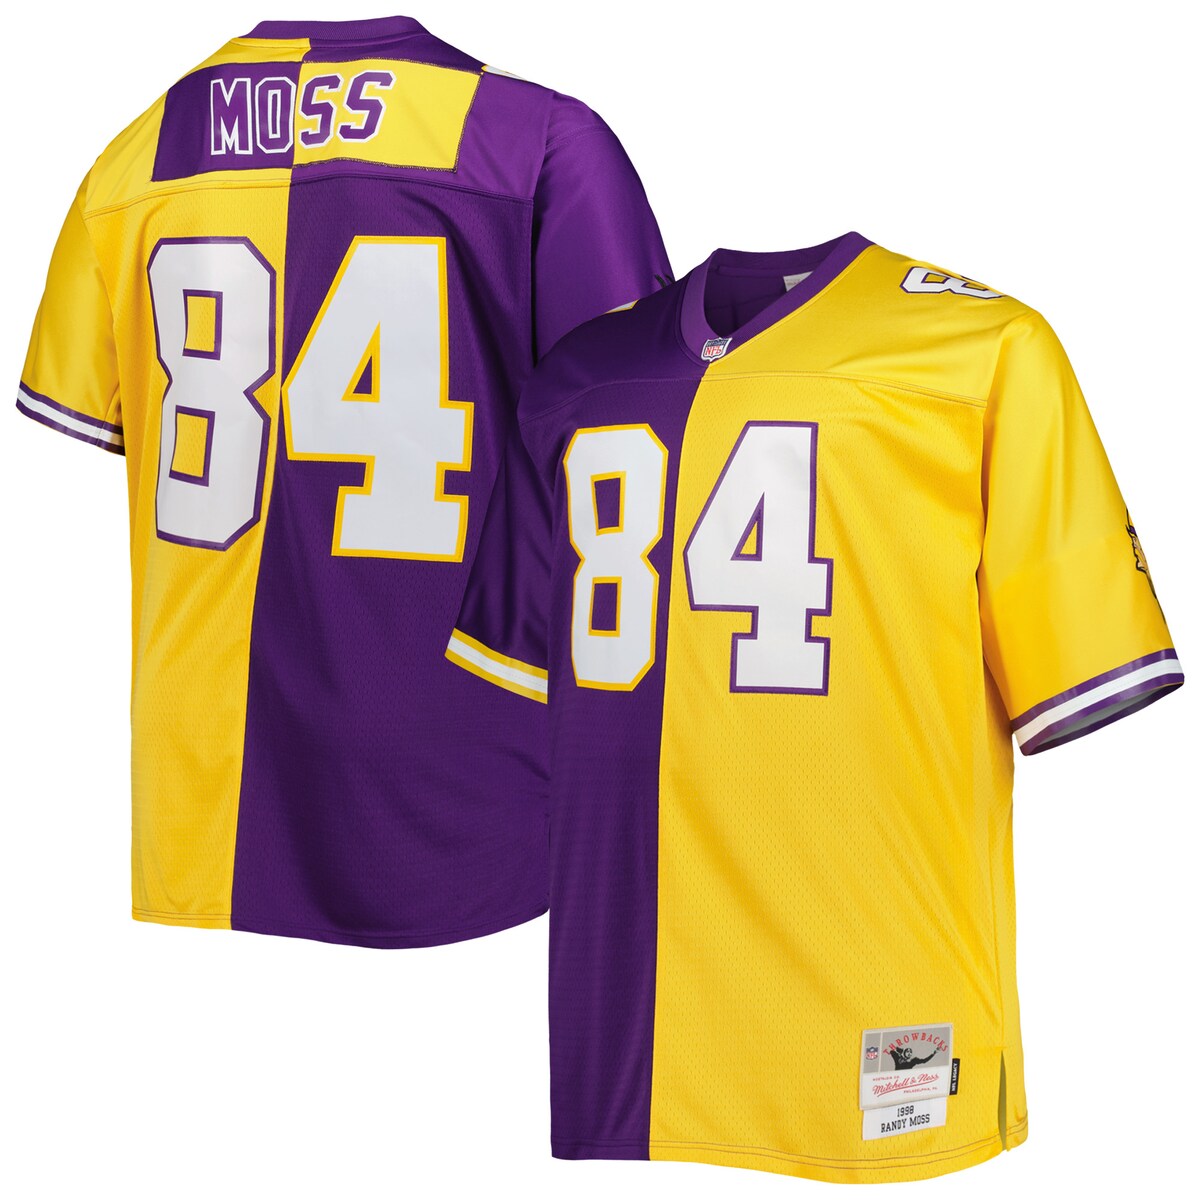 Pay homage to one of the greatest players in NFL history with this Randy Moss Split Legacy Replica jersey by Mitchell & Ness. The contrasting Minnesota Vikings colors and distinct Randy Moss name and number graphics make this top the perfect commemorative option. The mesh bodice adds breathability to your day.Rib-knit collarMachine wash, line dryOfficially licensedReplica Throwback JerseyMaterial: 100% PolyesterHeat-sealed graphicsTackle twill appliqueWoven jock tag on bottom left hemMesh bodiceV-neckStitched fabric appliqueBrand: Mitchell & NessImportedShort sleeveDroptail hem with side splits